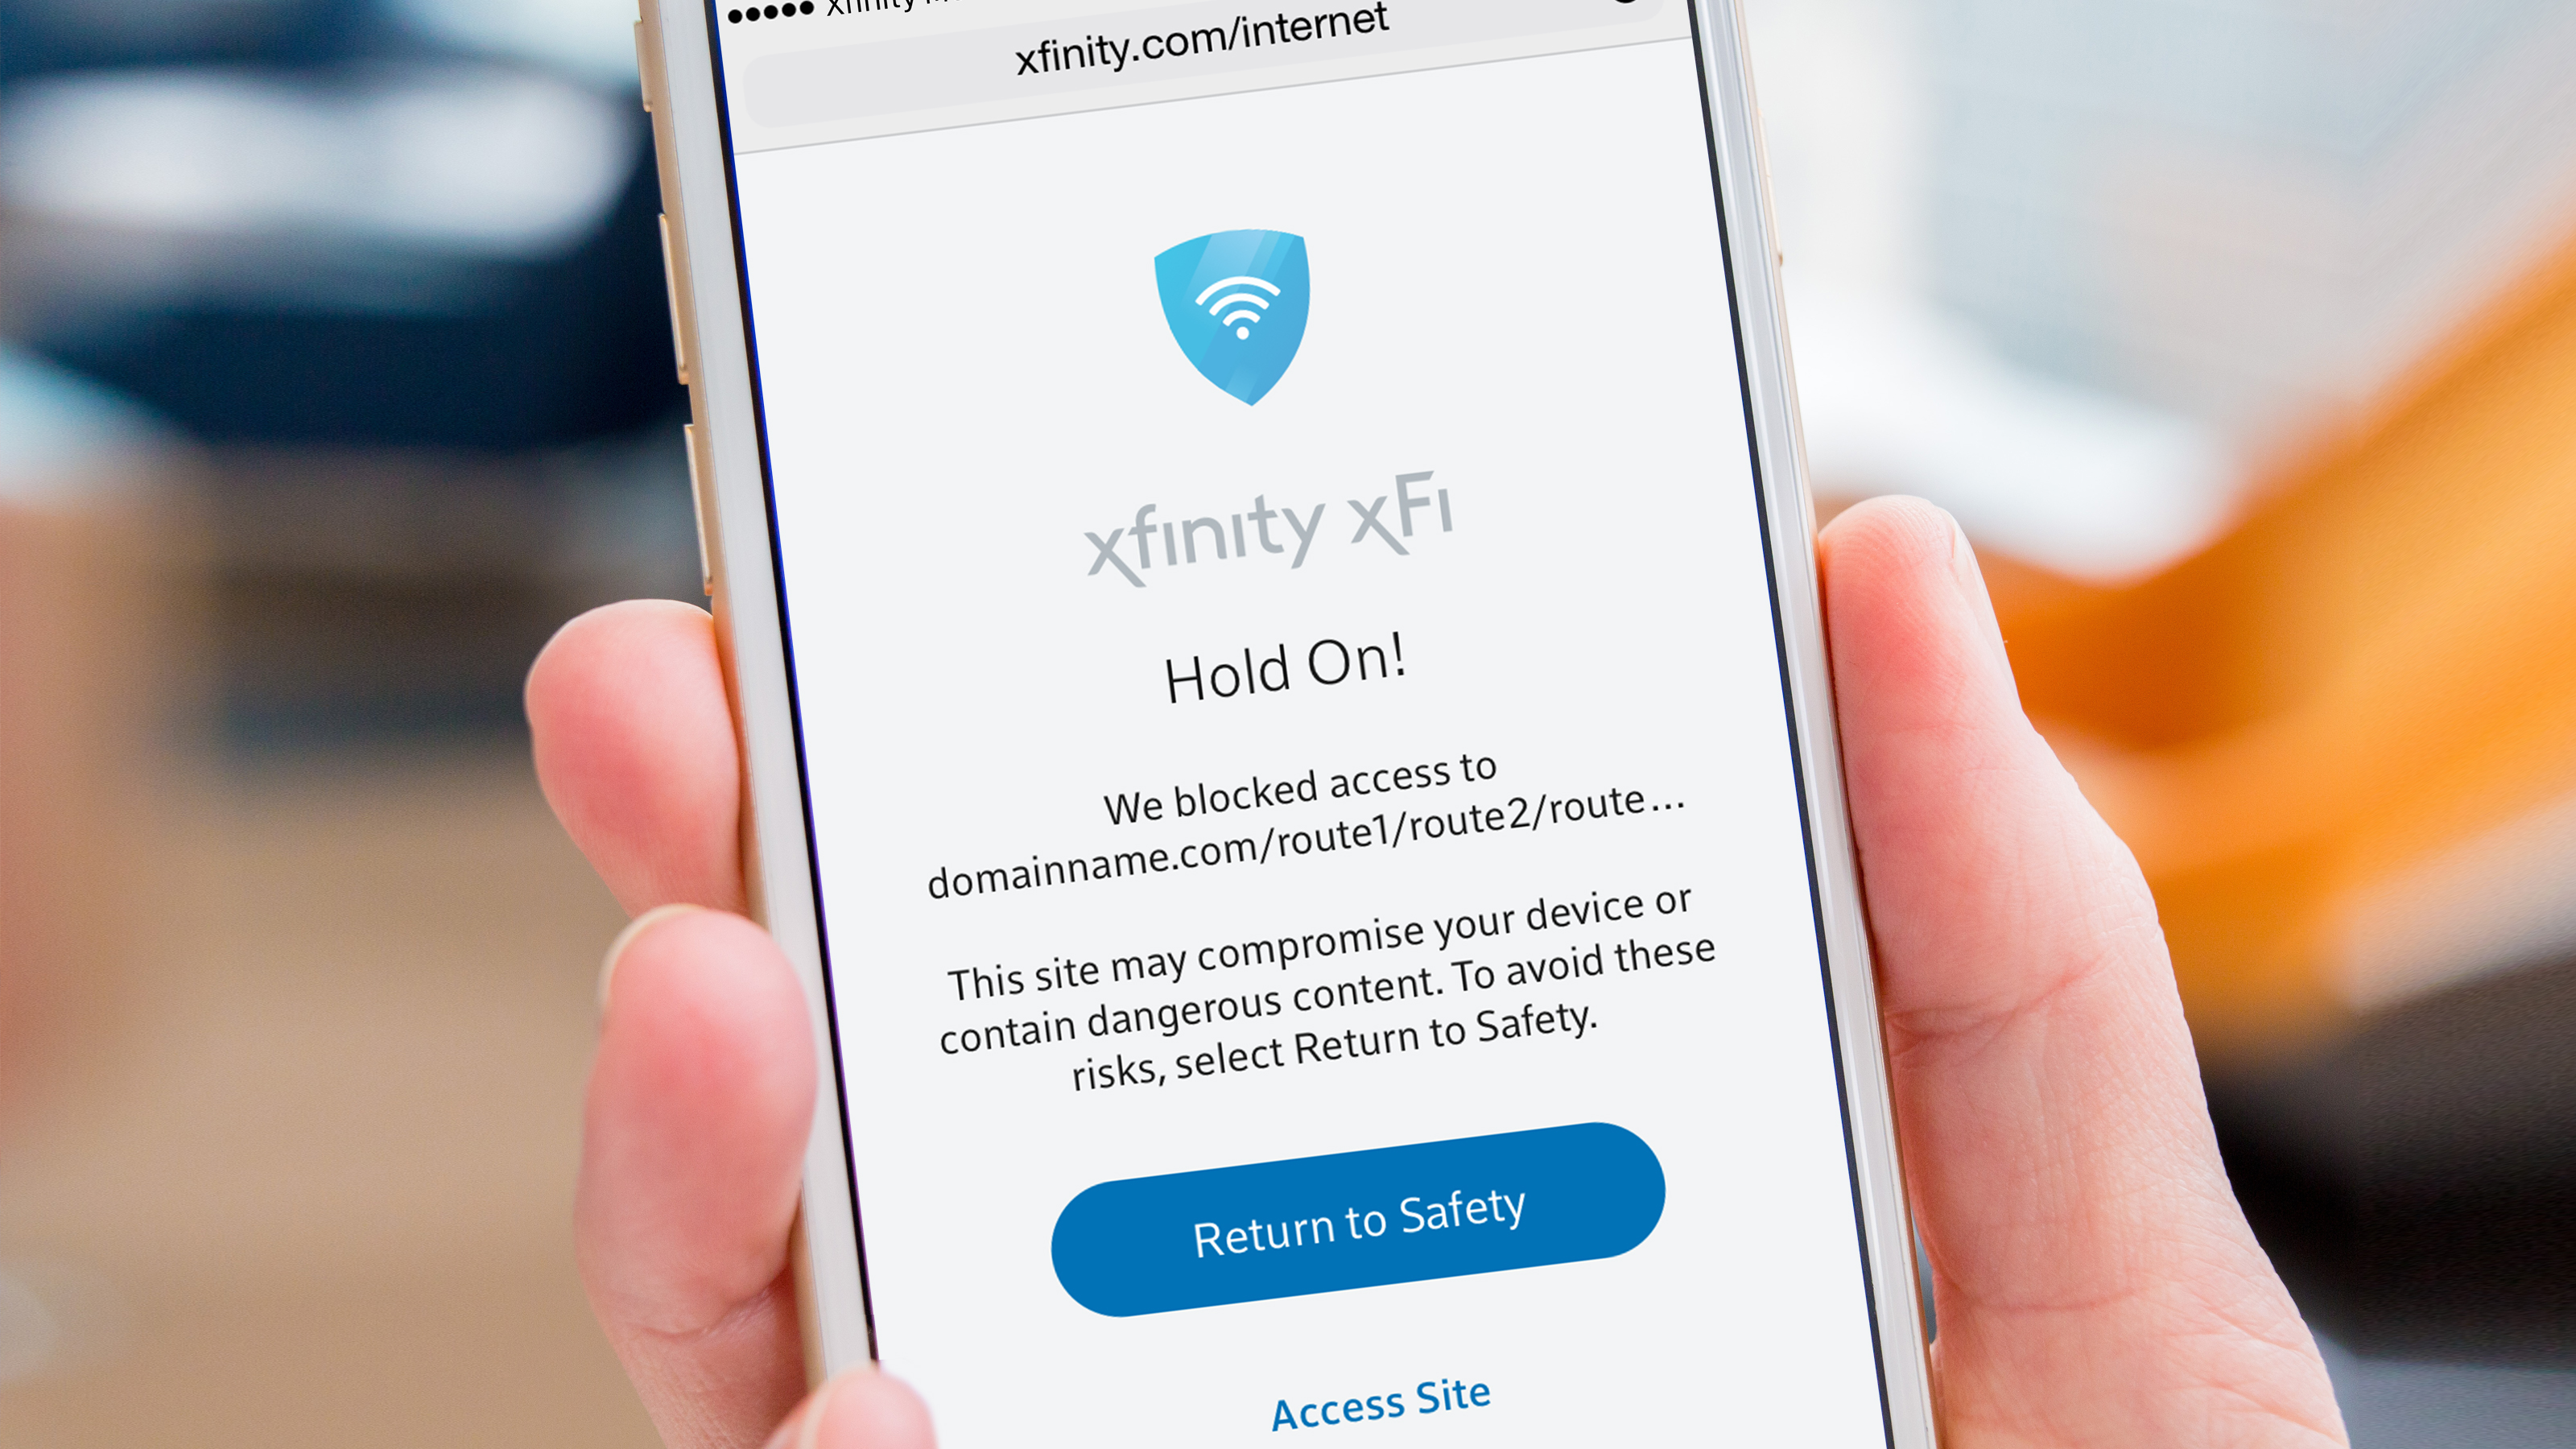 xFi Internet from Comcast for Washington state Customers